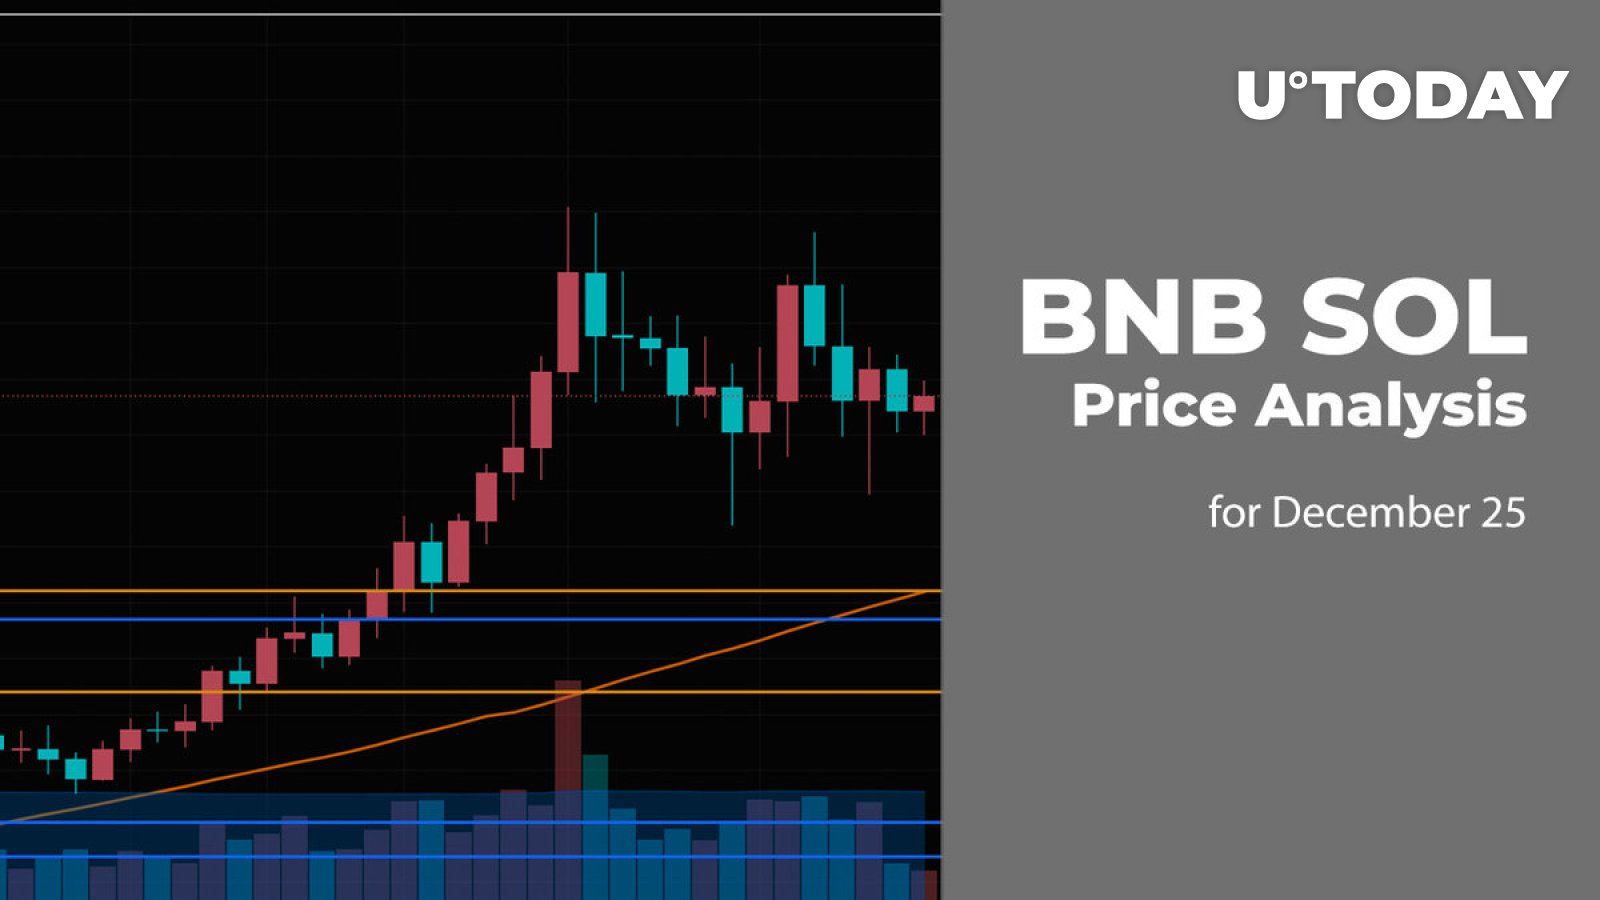 BNB and SOL Price Analysis for December 25